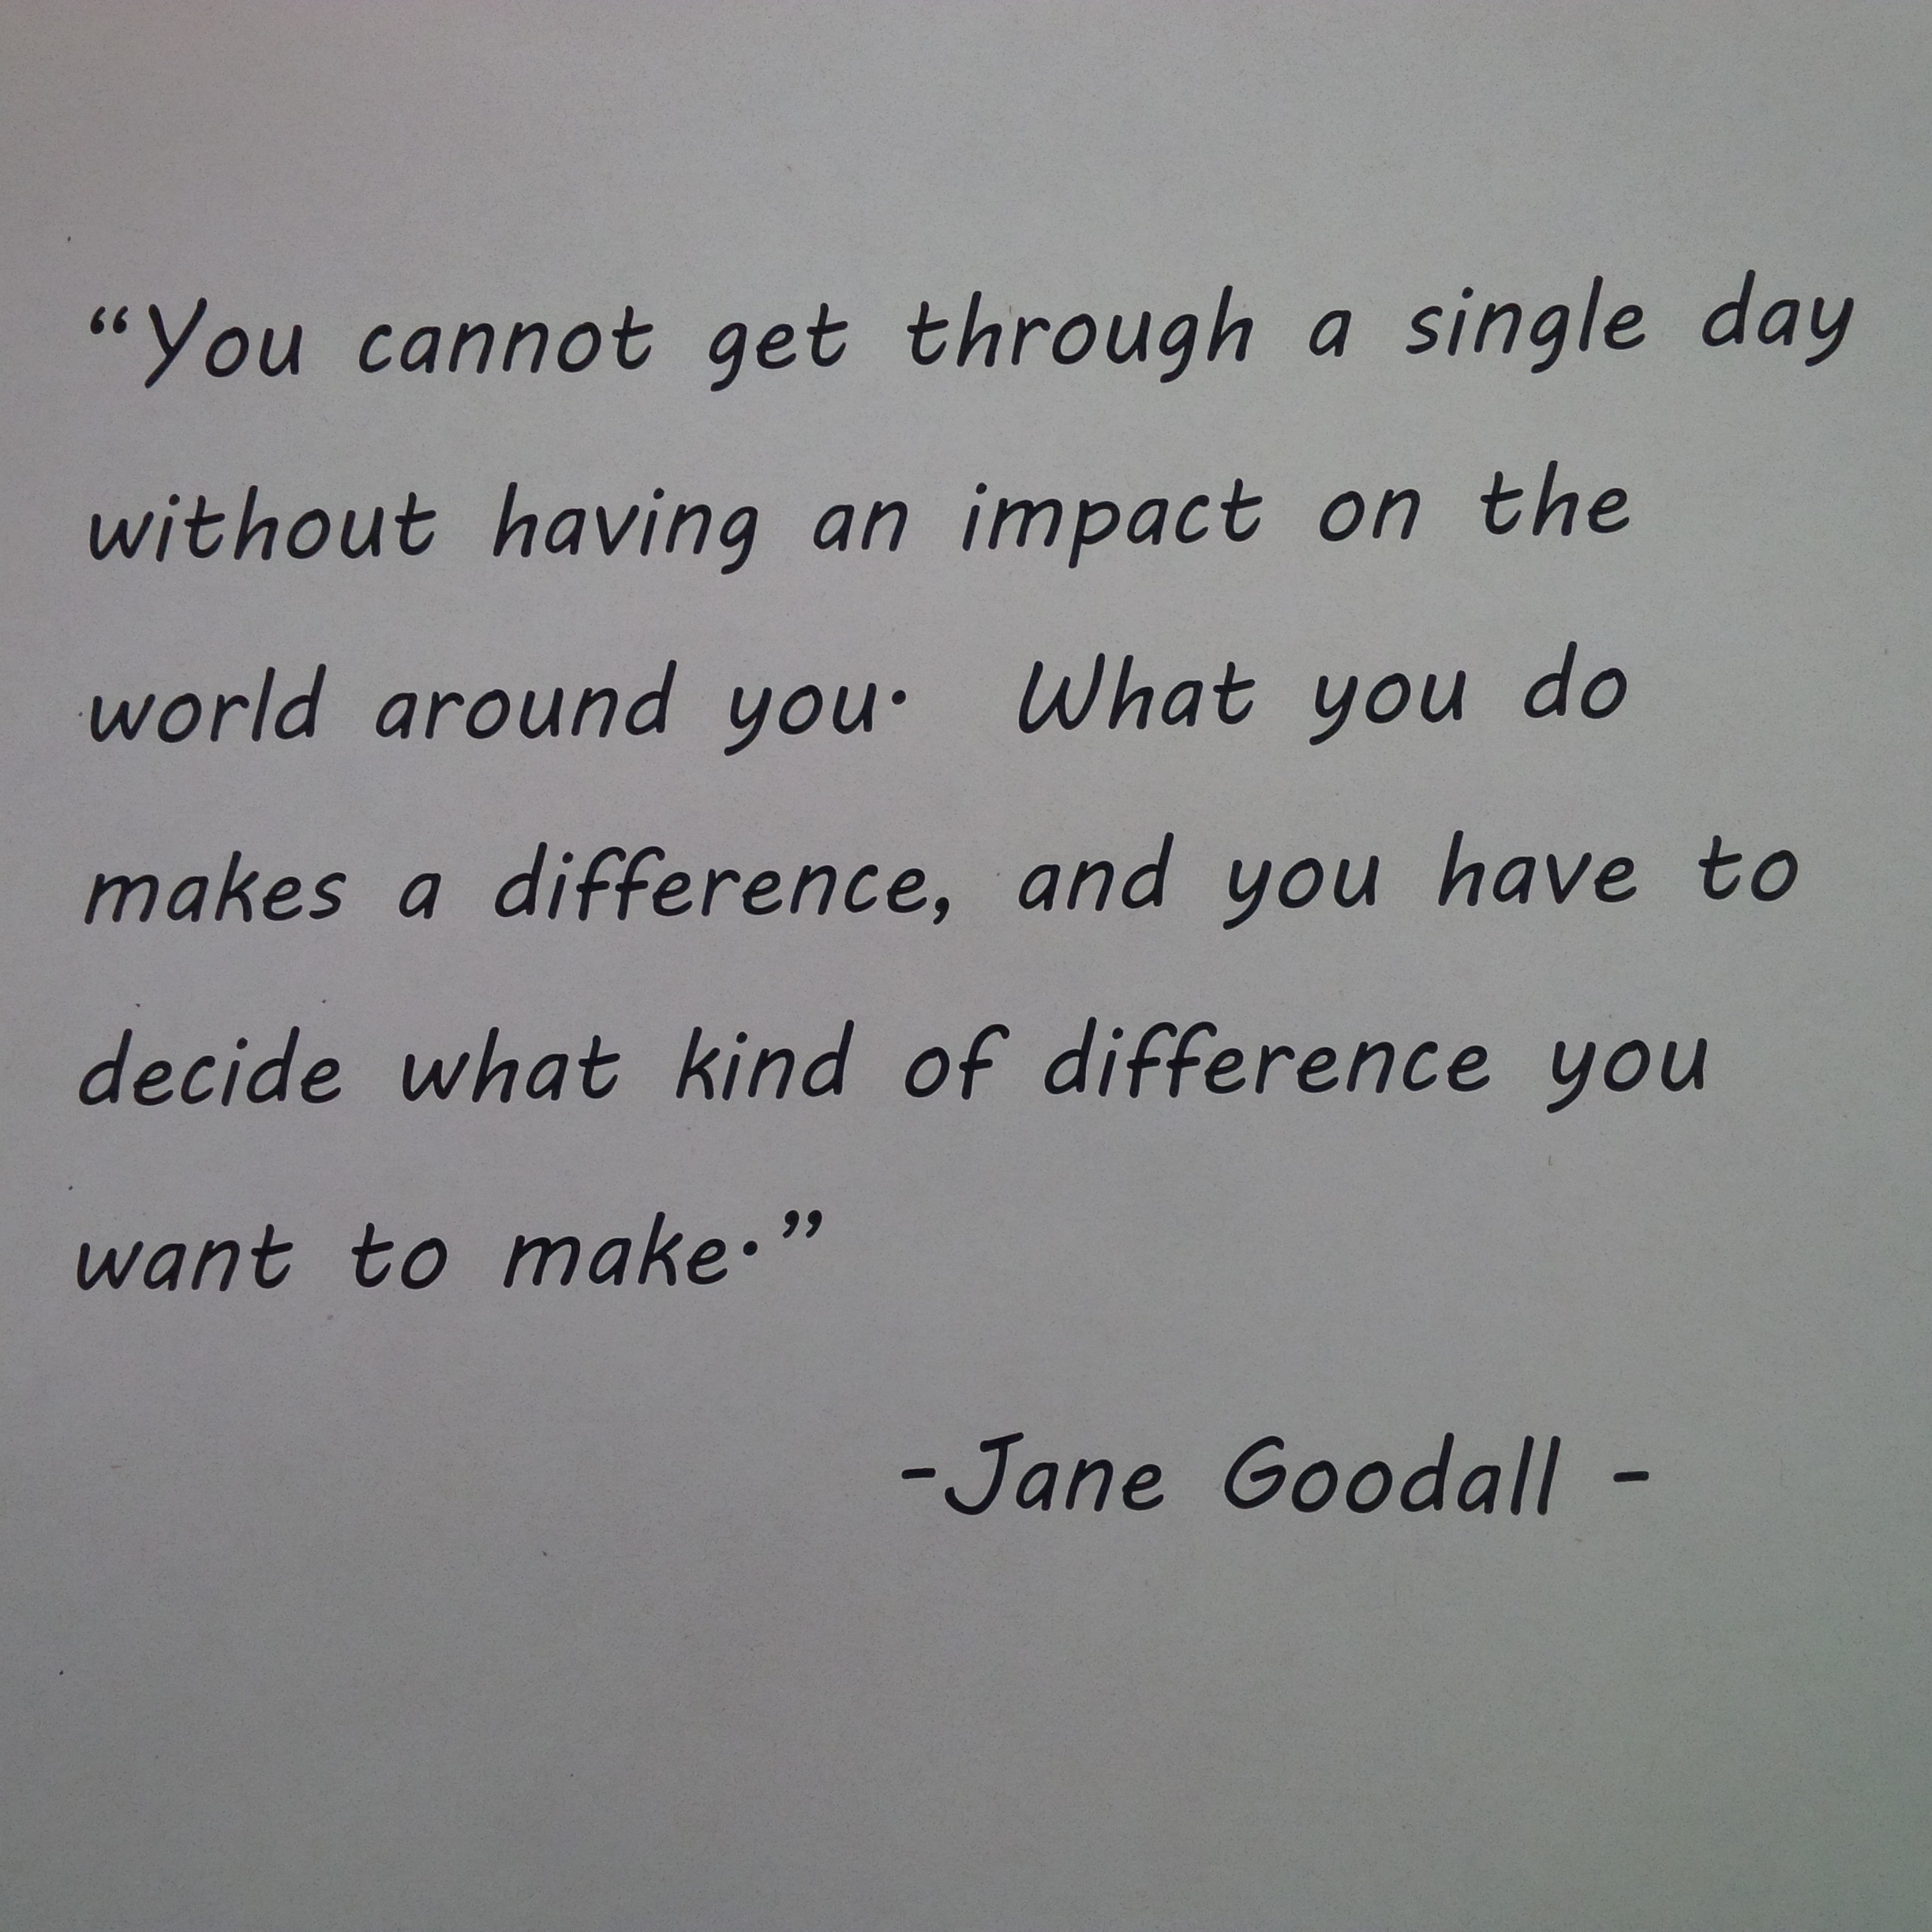 Quote by Jane Goodall